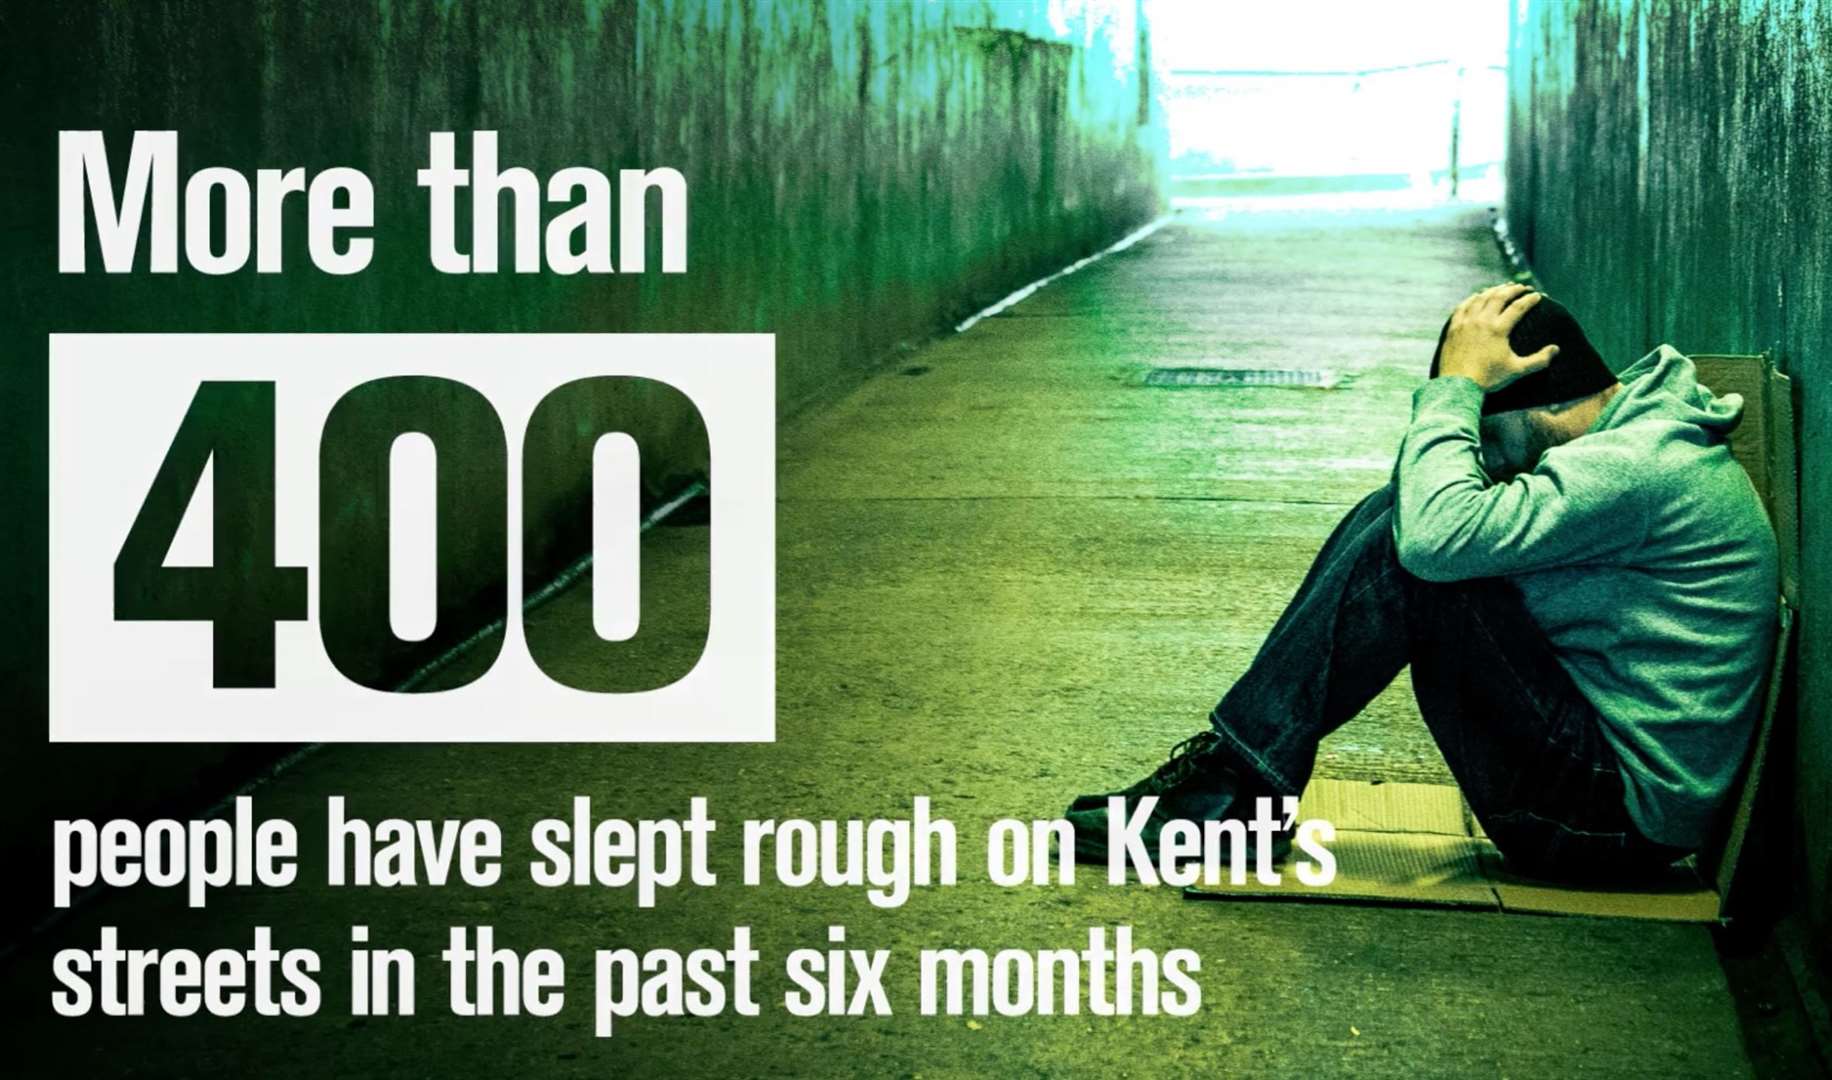 Porchlight collated these figures along with other charities as part of Kent Homeless Connect